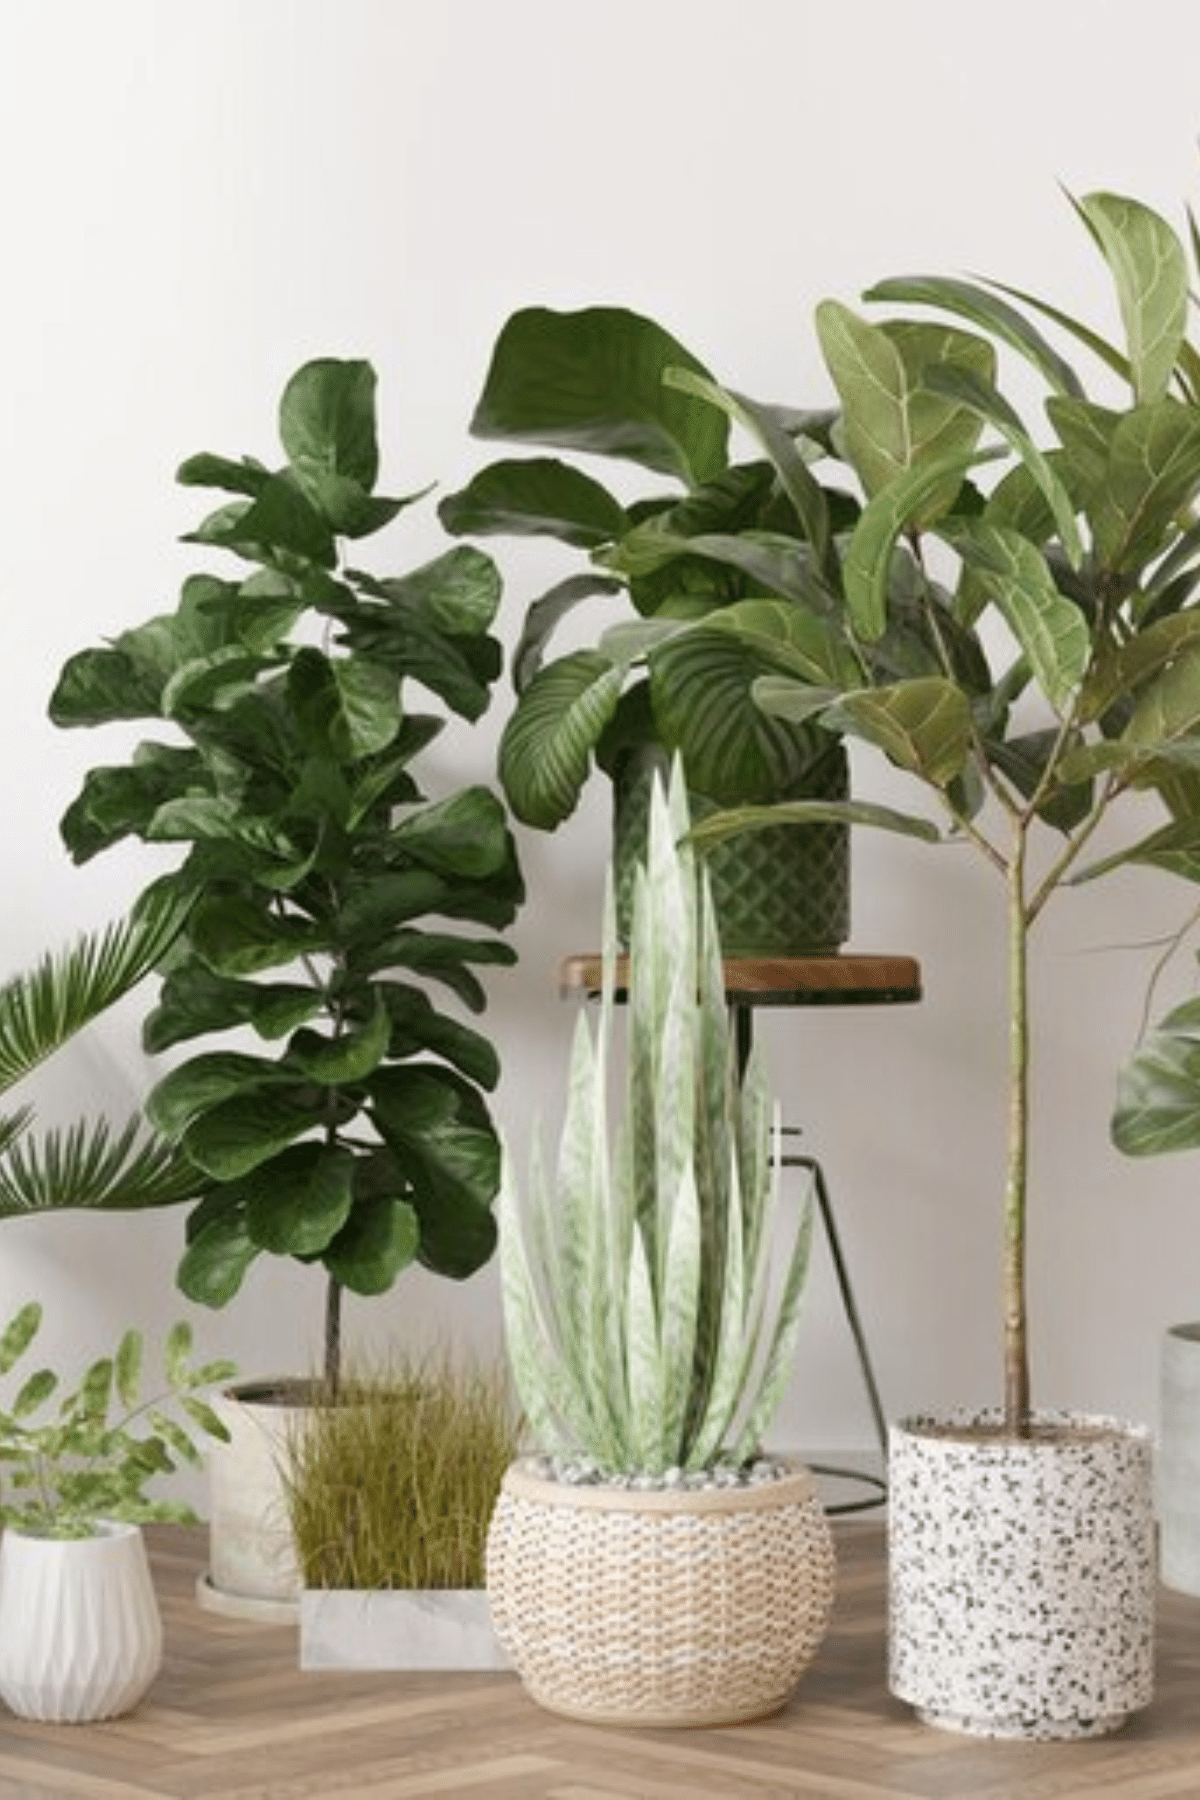 Various tropical house plants in modern stylish pots.